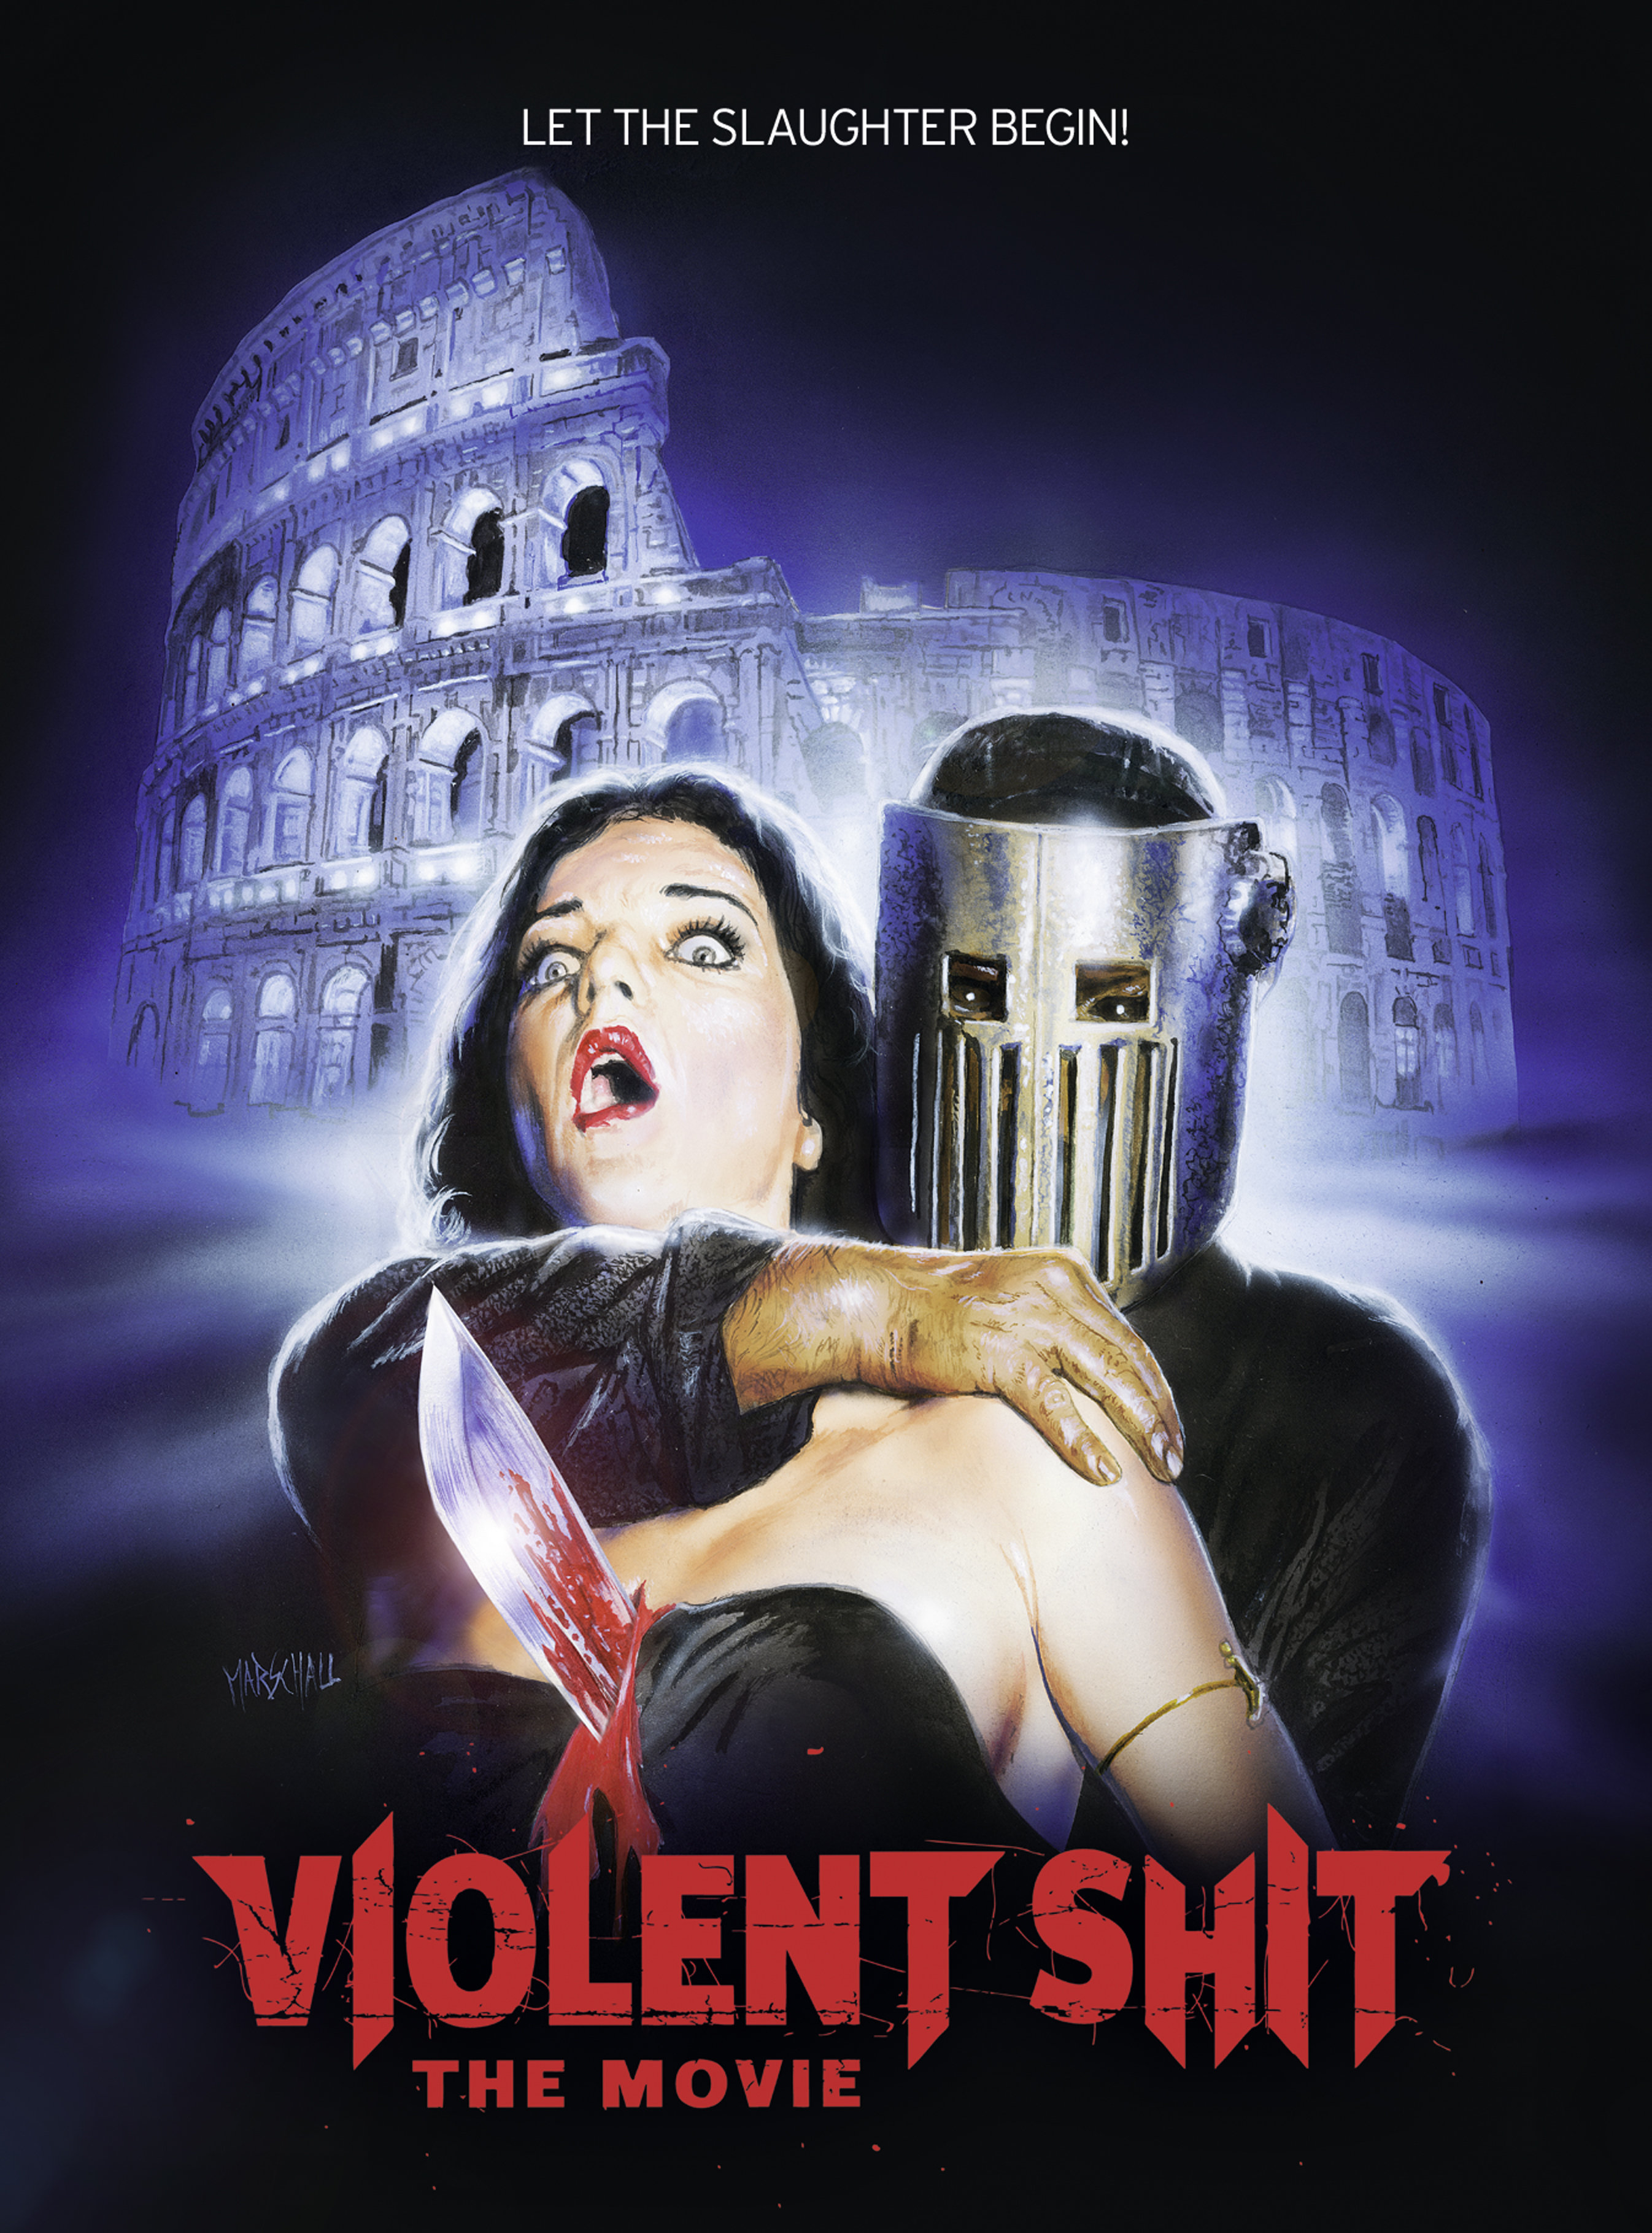 Violent Shit: The Movie (2015) starring Matteo Pastore on DVD on DVD